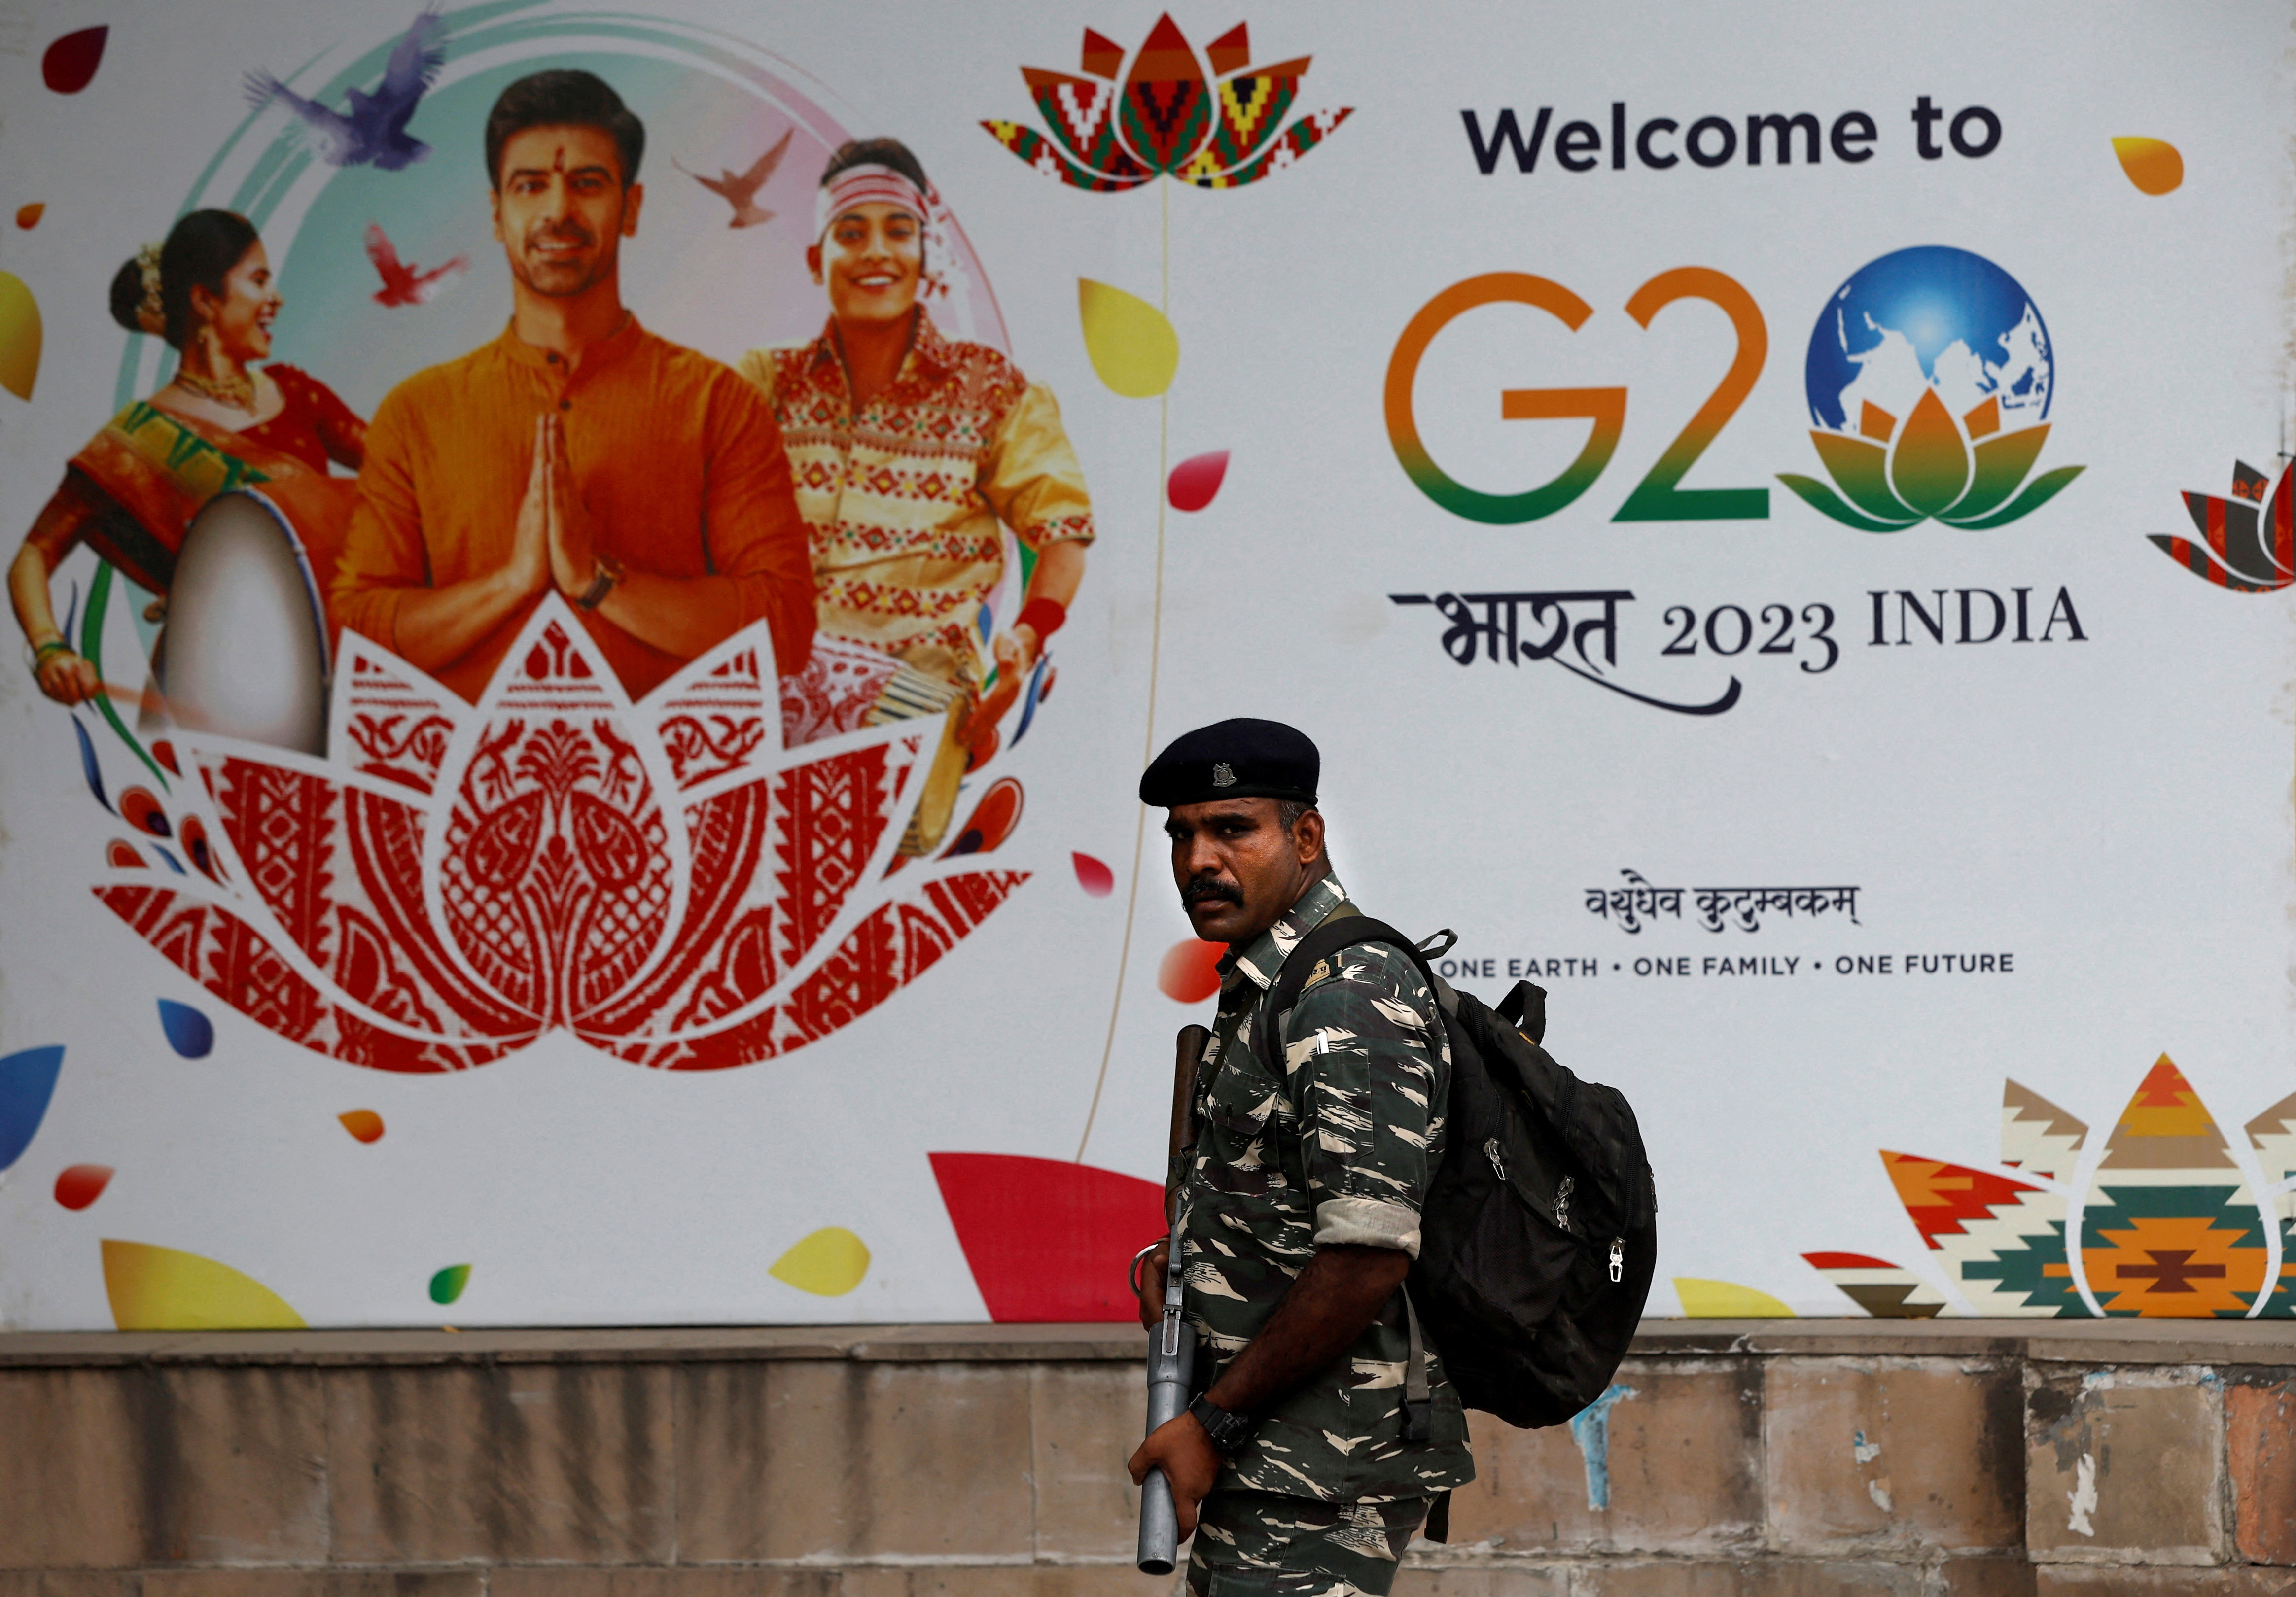 A Central Reserve Police Force personnel patrols a road next to a hoarding ahead of the G20 Summit in New Delhi